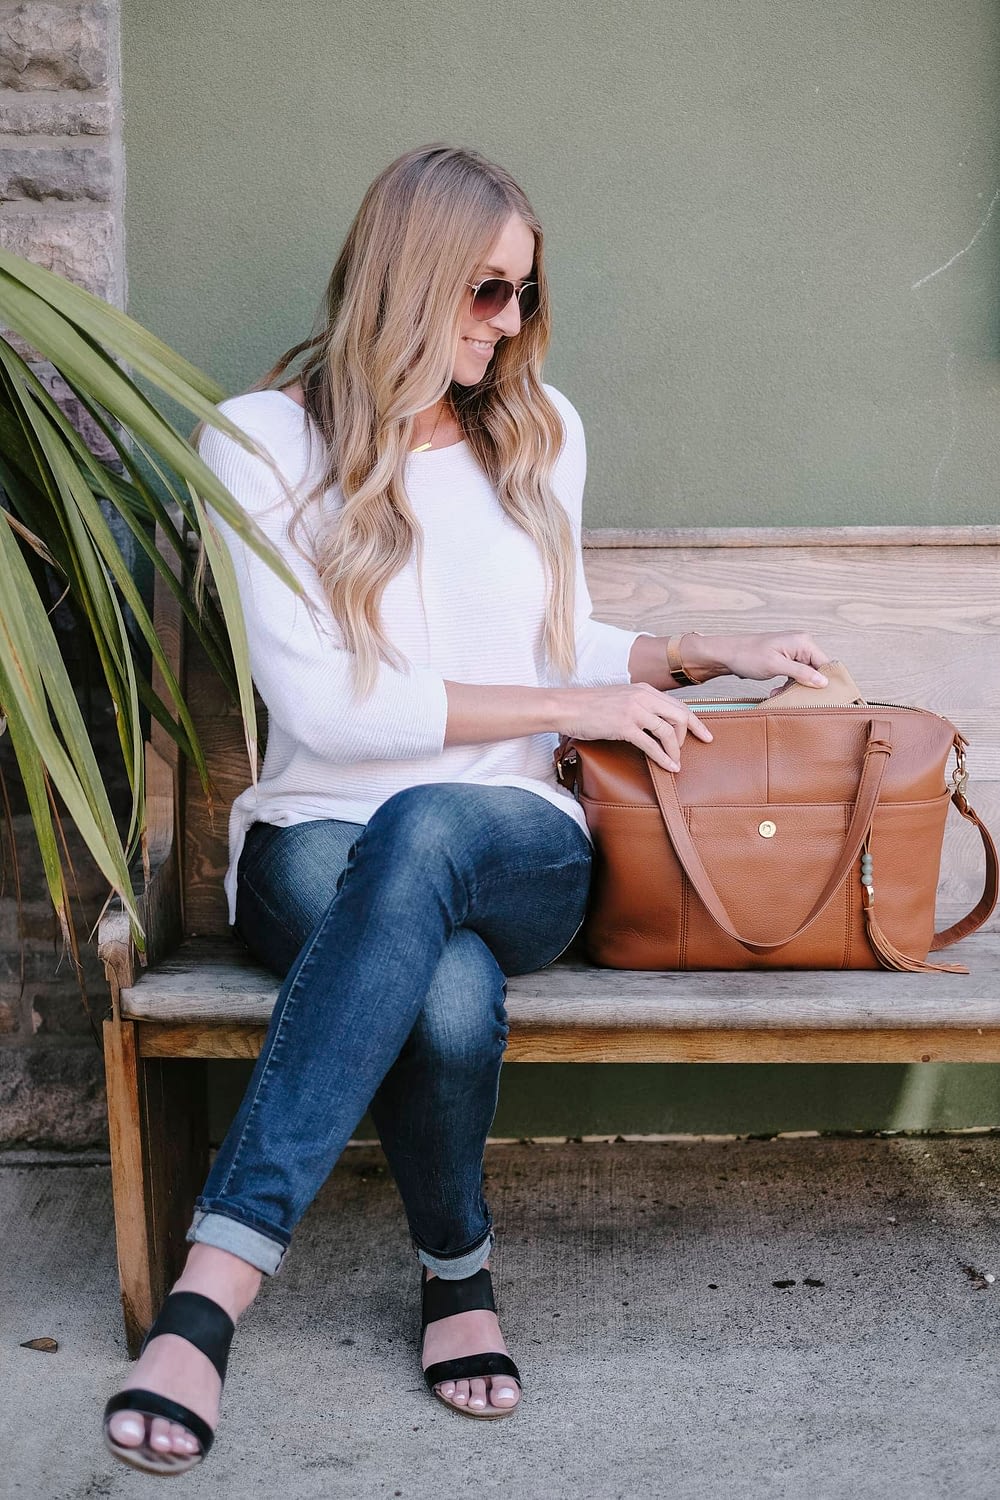 Blonde woman sitting next to lily jade diaper bag on a bench